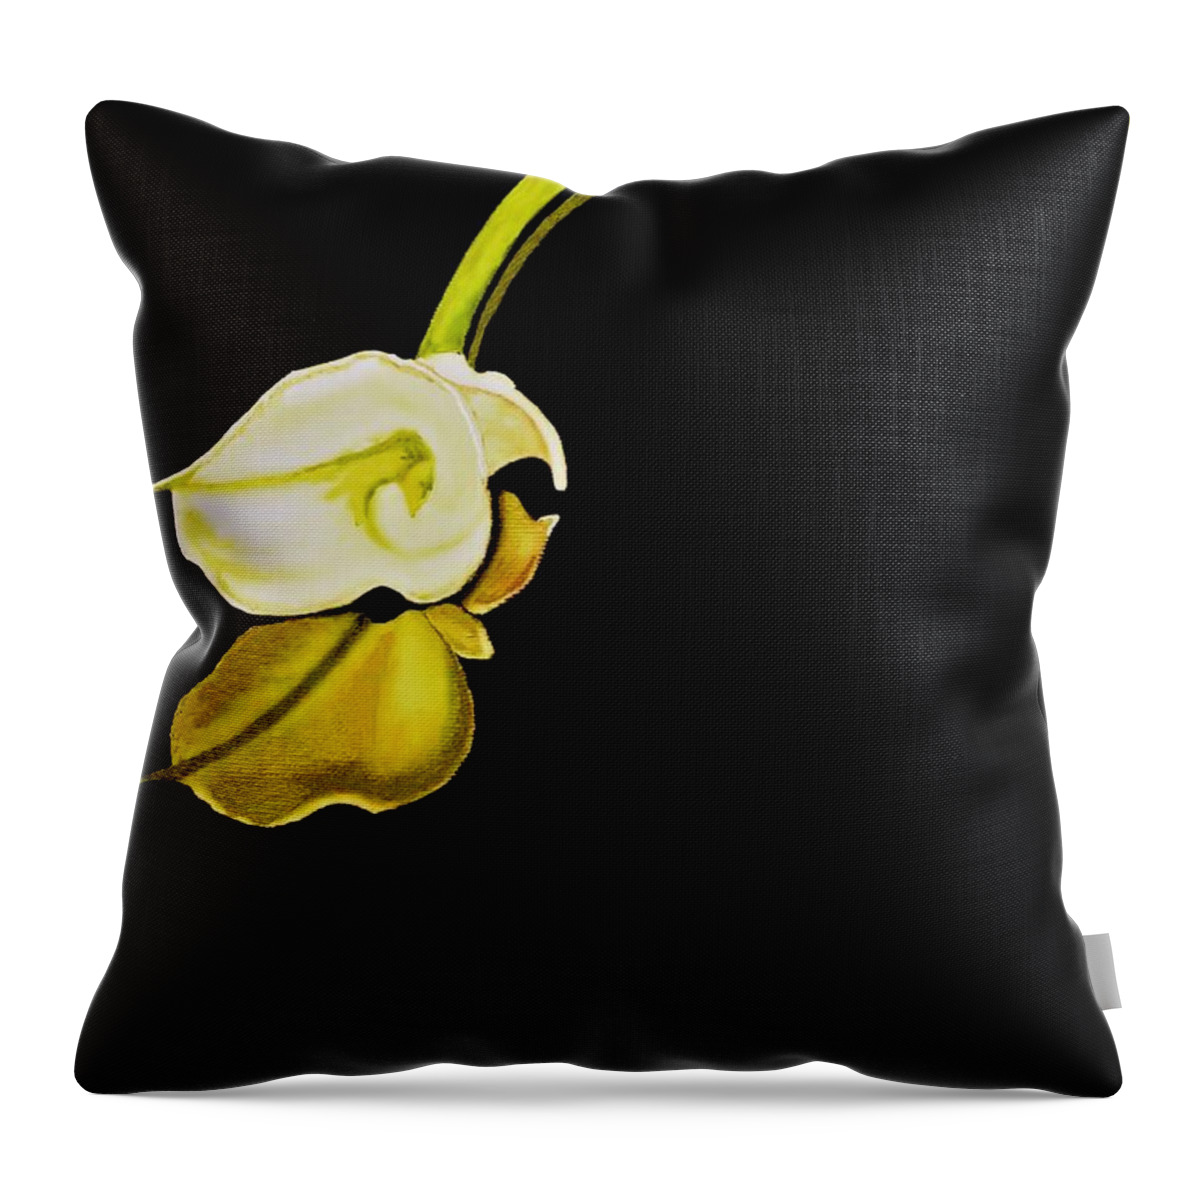 Flower Throw Pillow featuring the painting Calla Lily Reflection by Victoria Rhodehouse